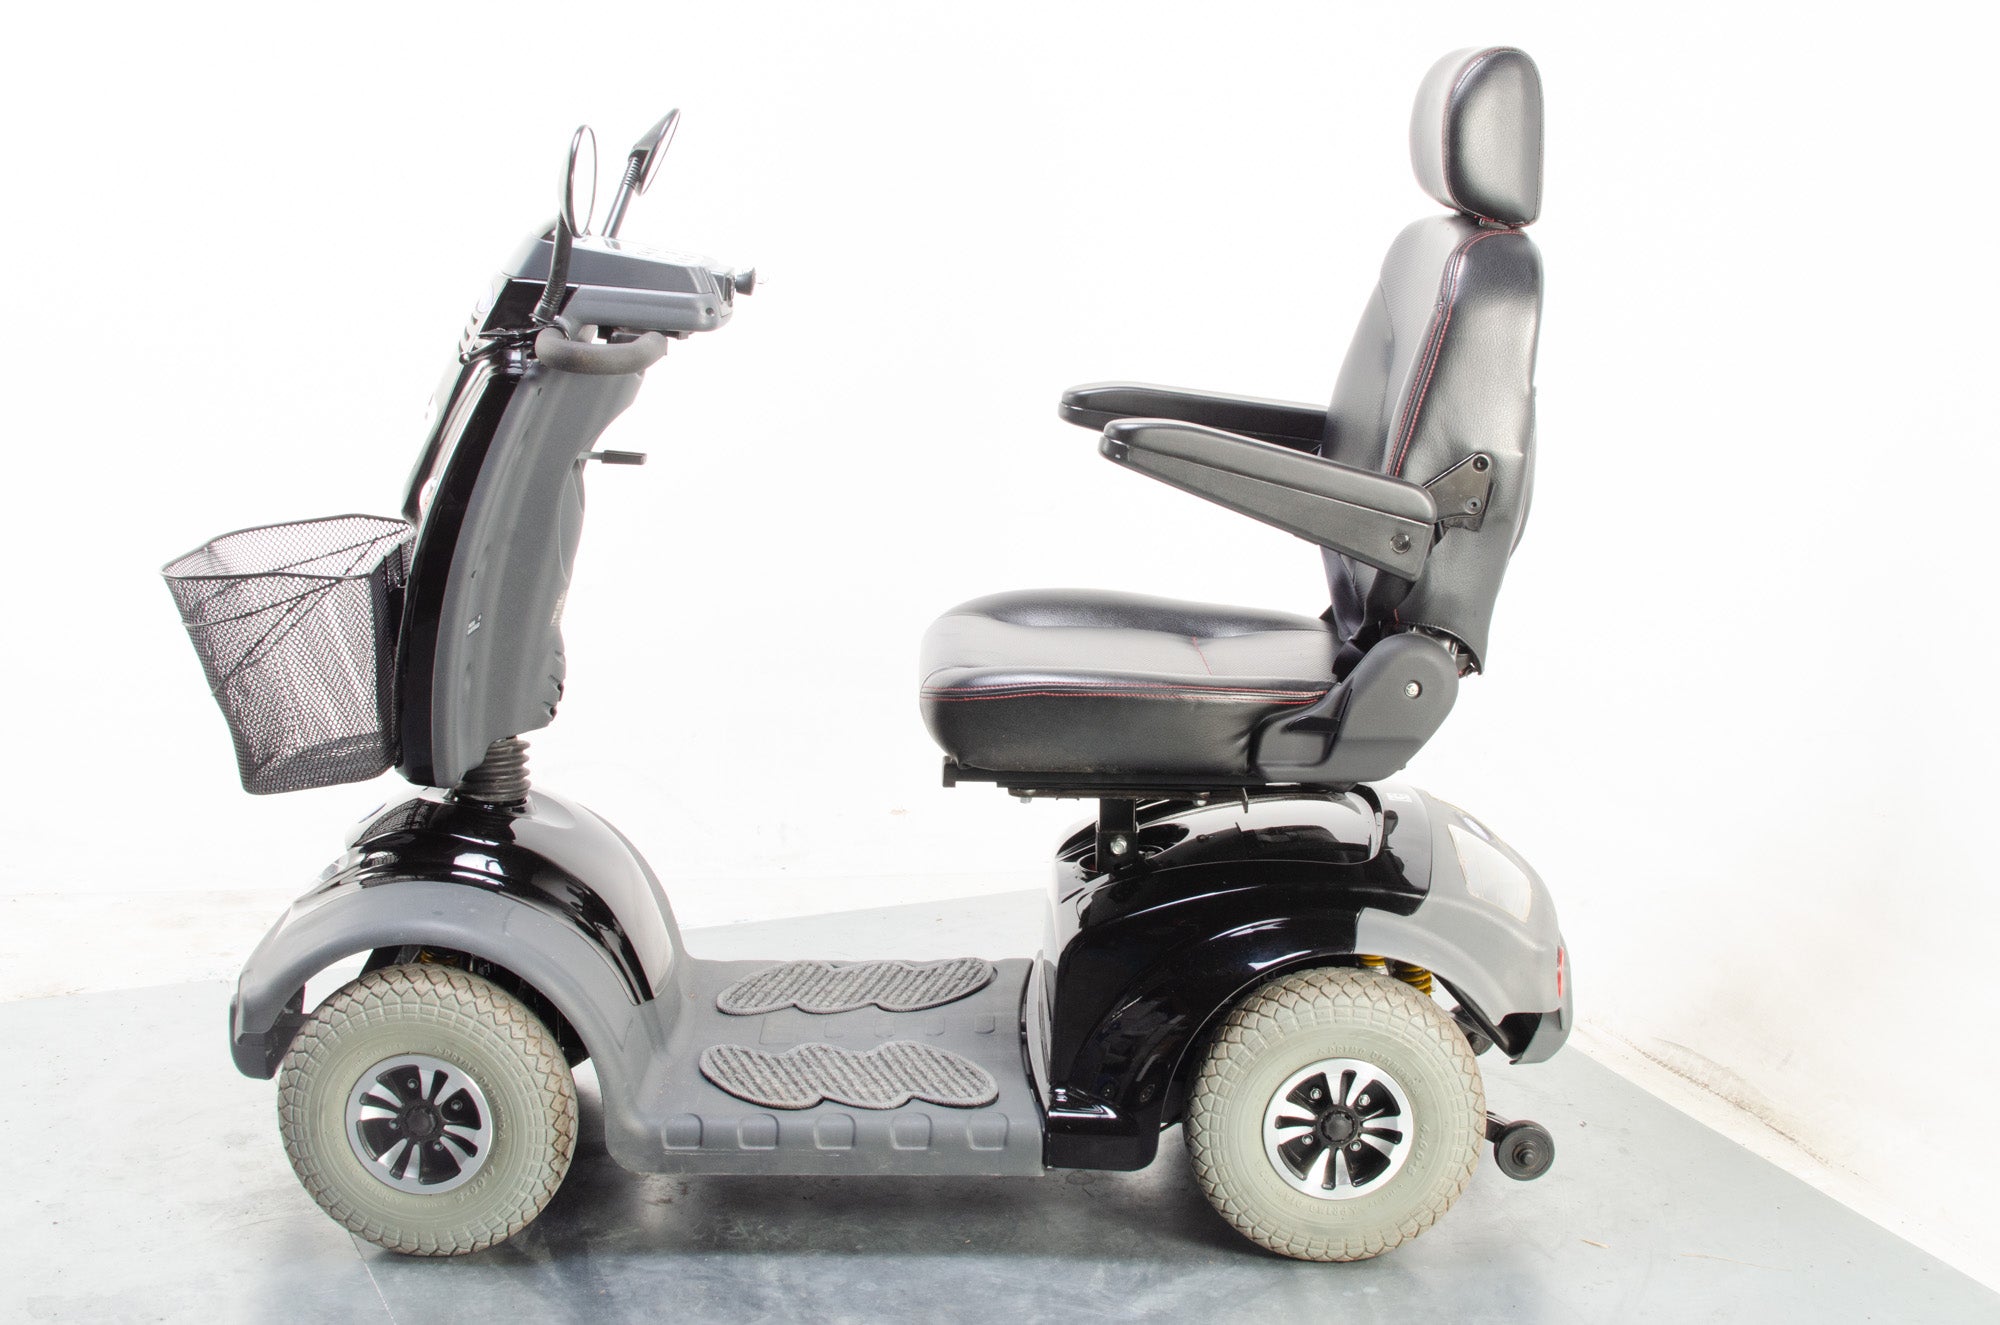 TGA Mystere Large Comfy Electric Mobility Scooter 8mph Class 3 Black